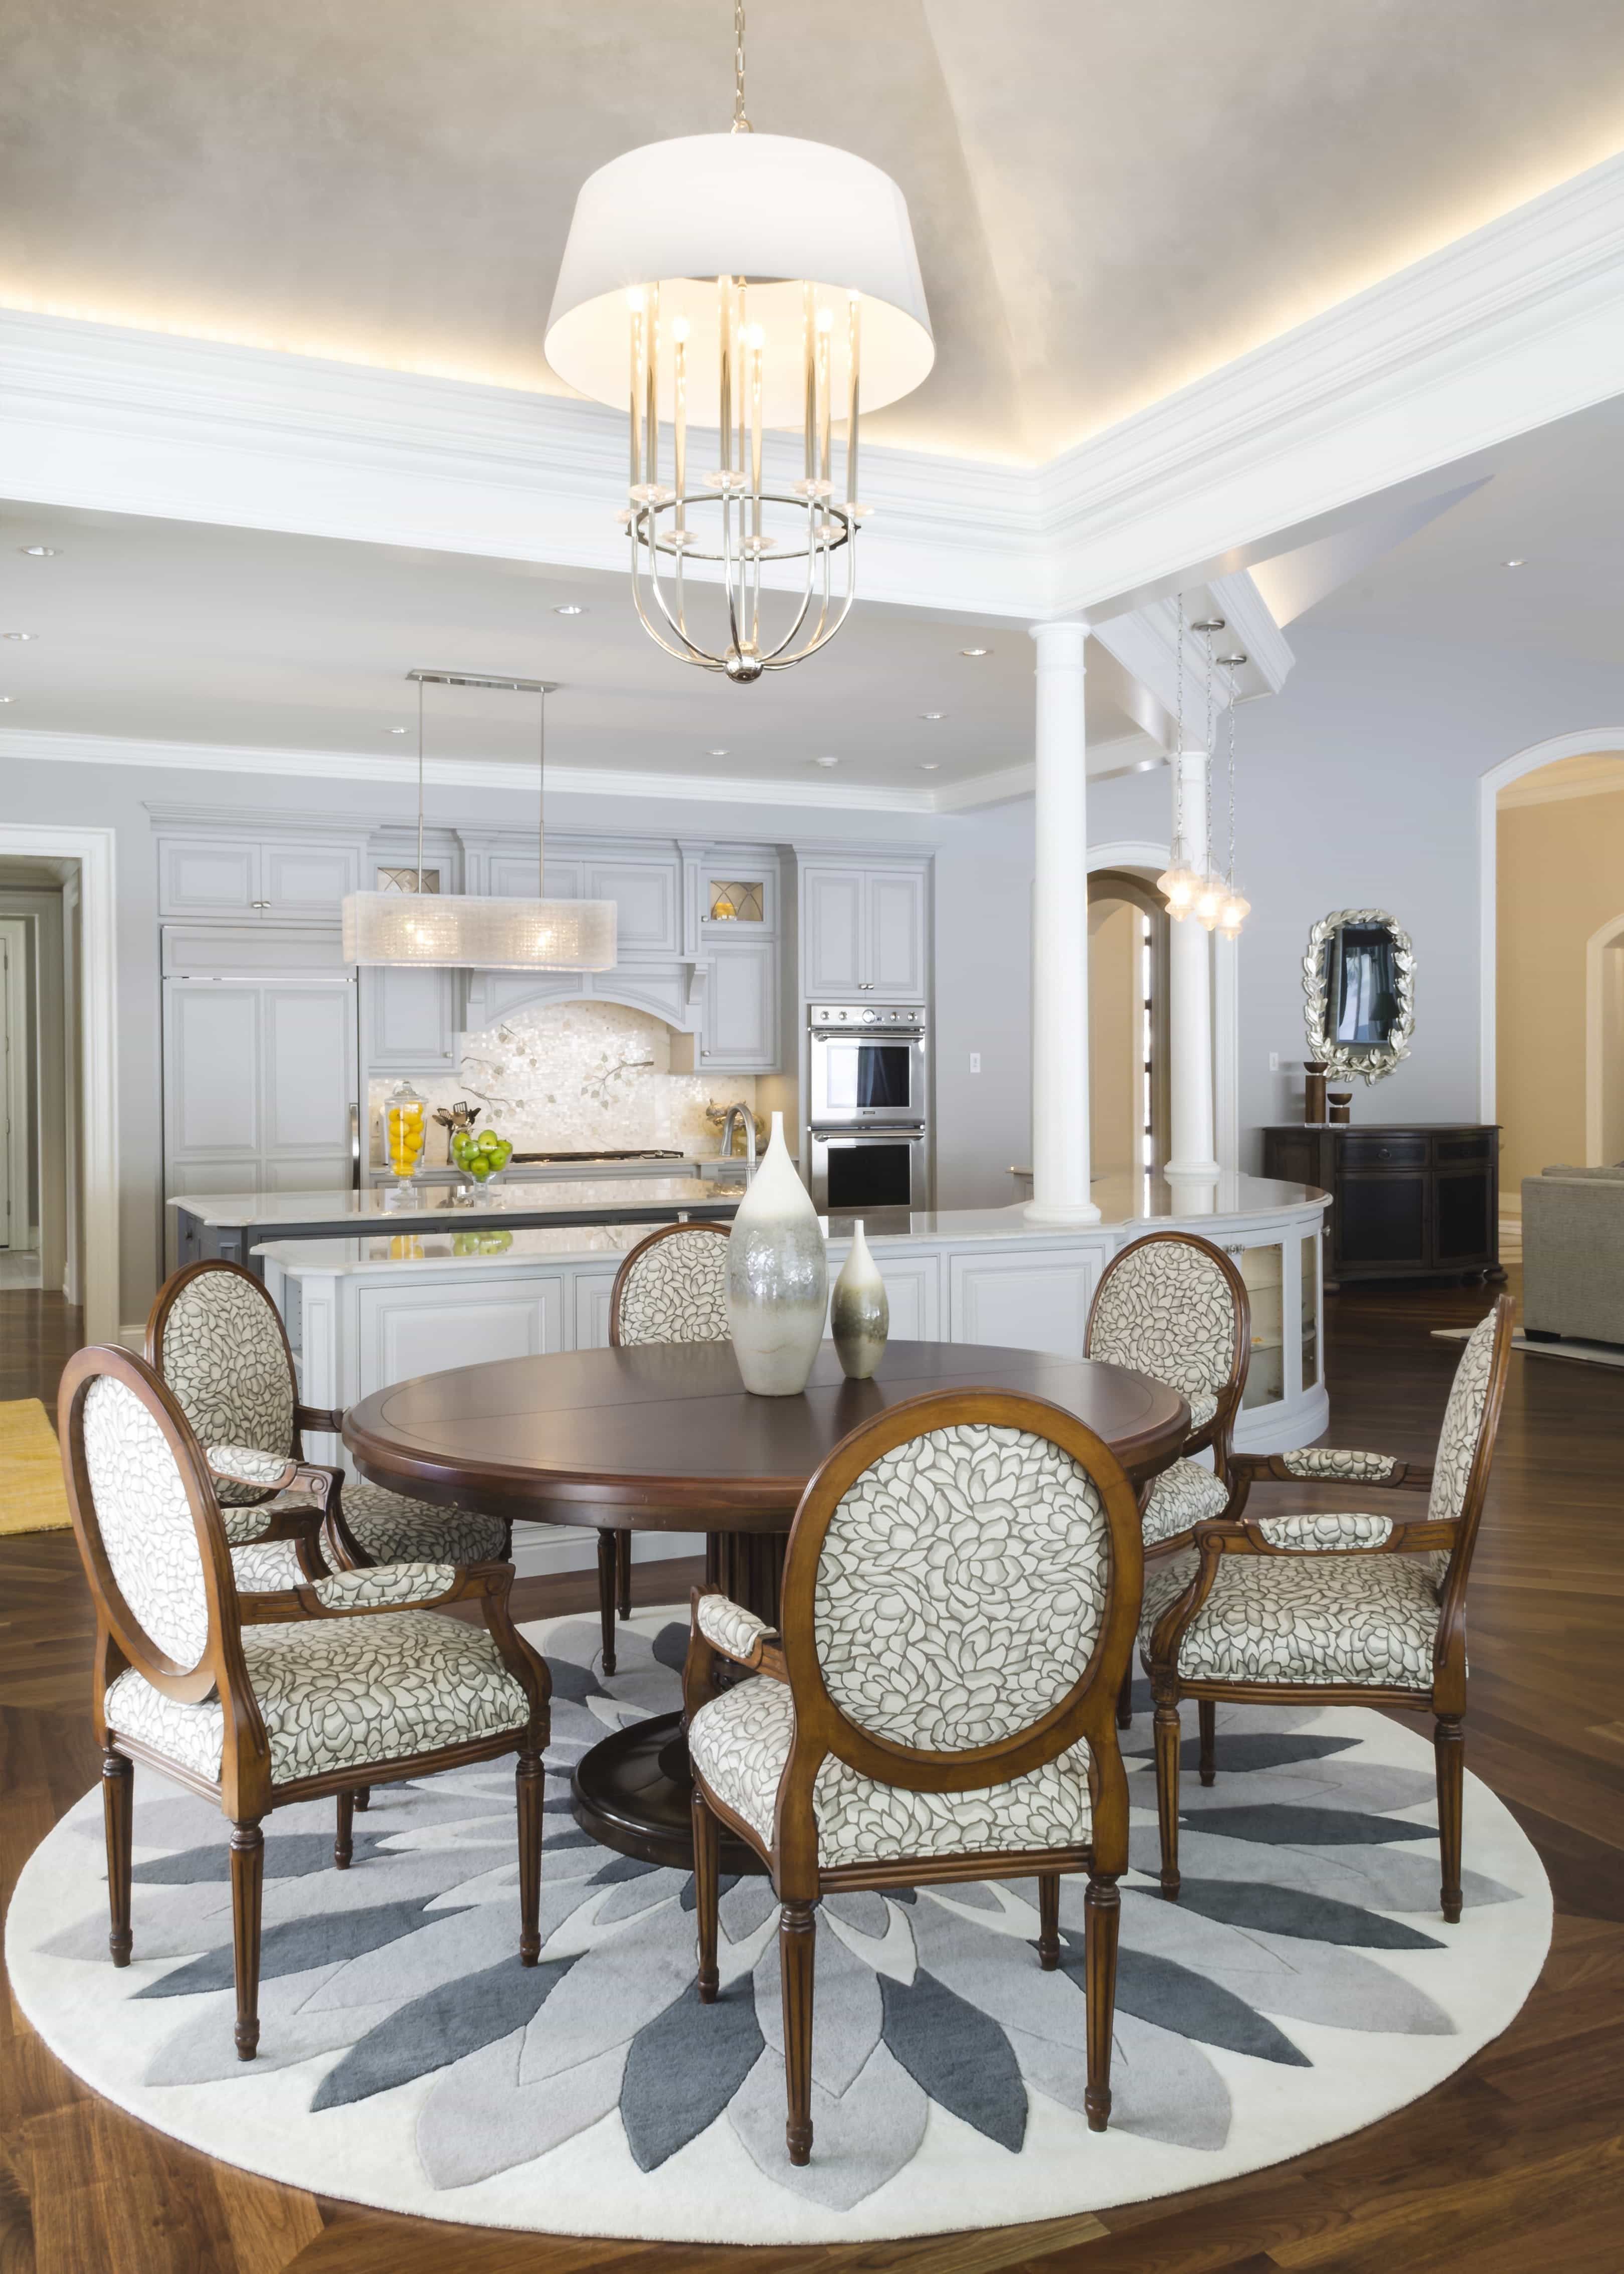 Stunning French Dining Room With Floral Accents And Eye Catching Chairs With Wooden Round Table (View 2 of 25)